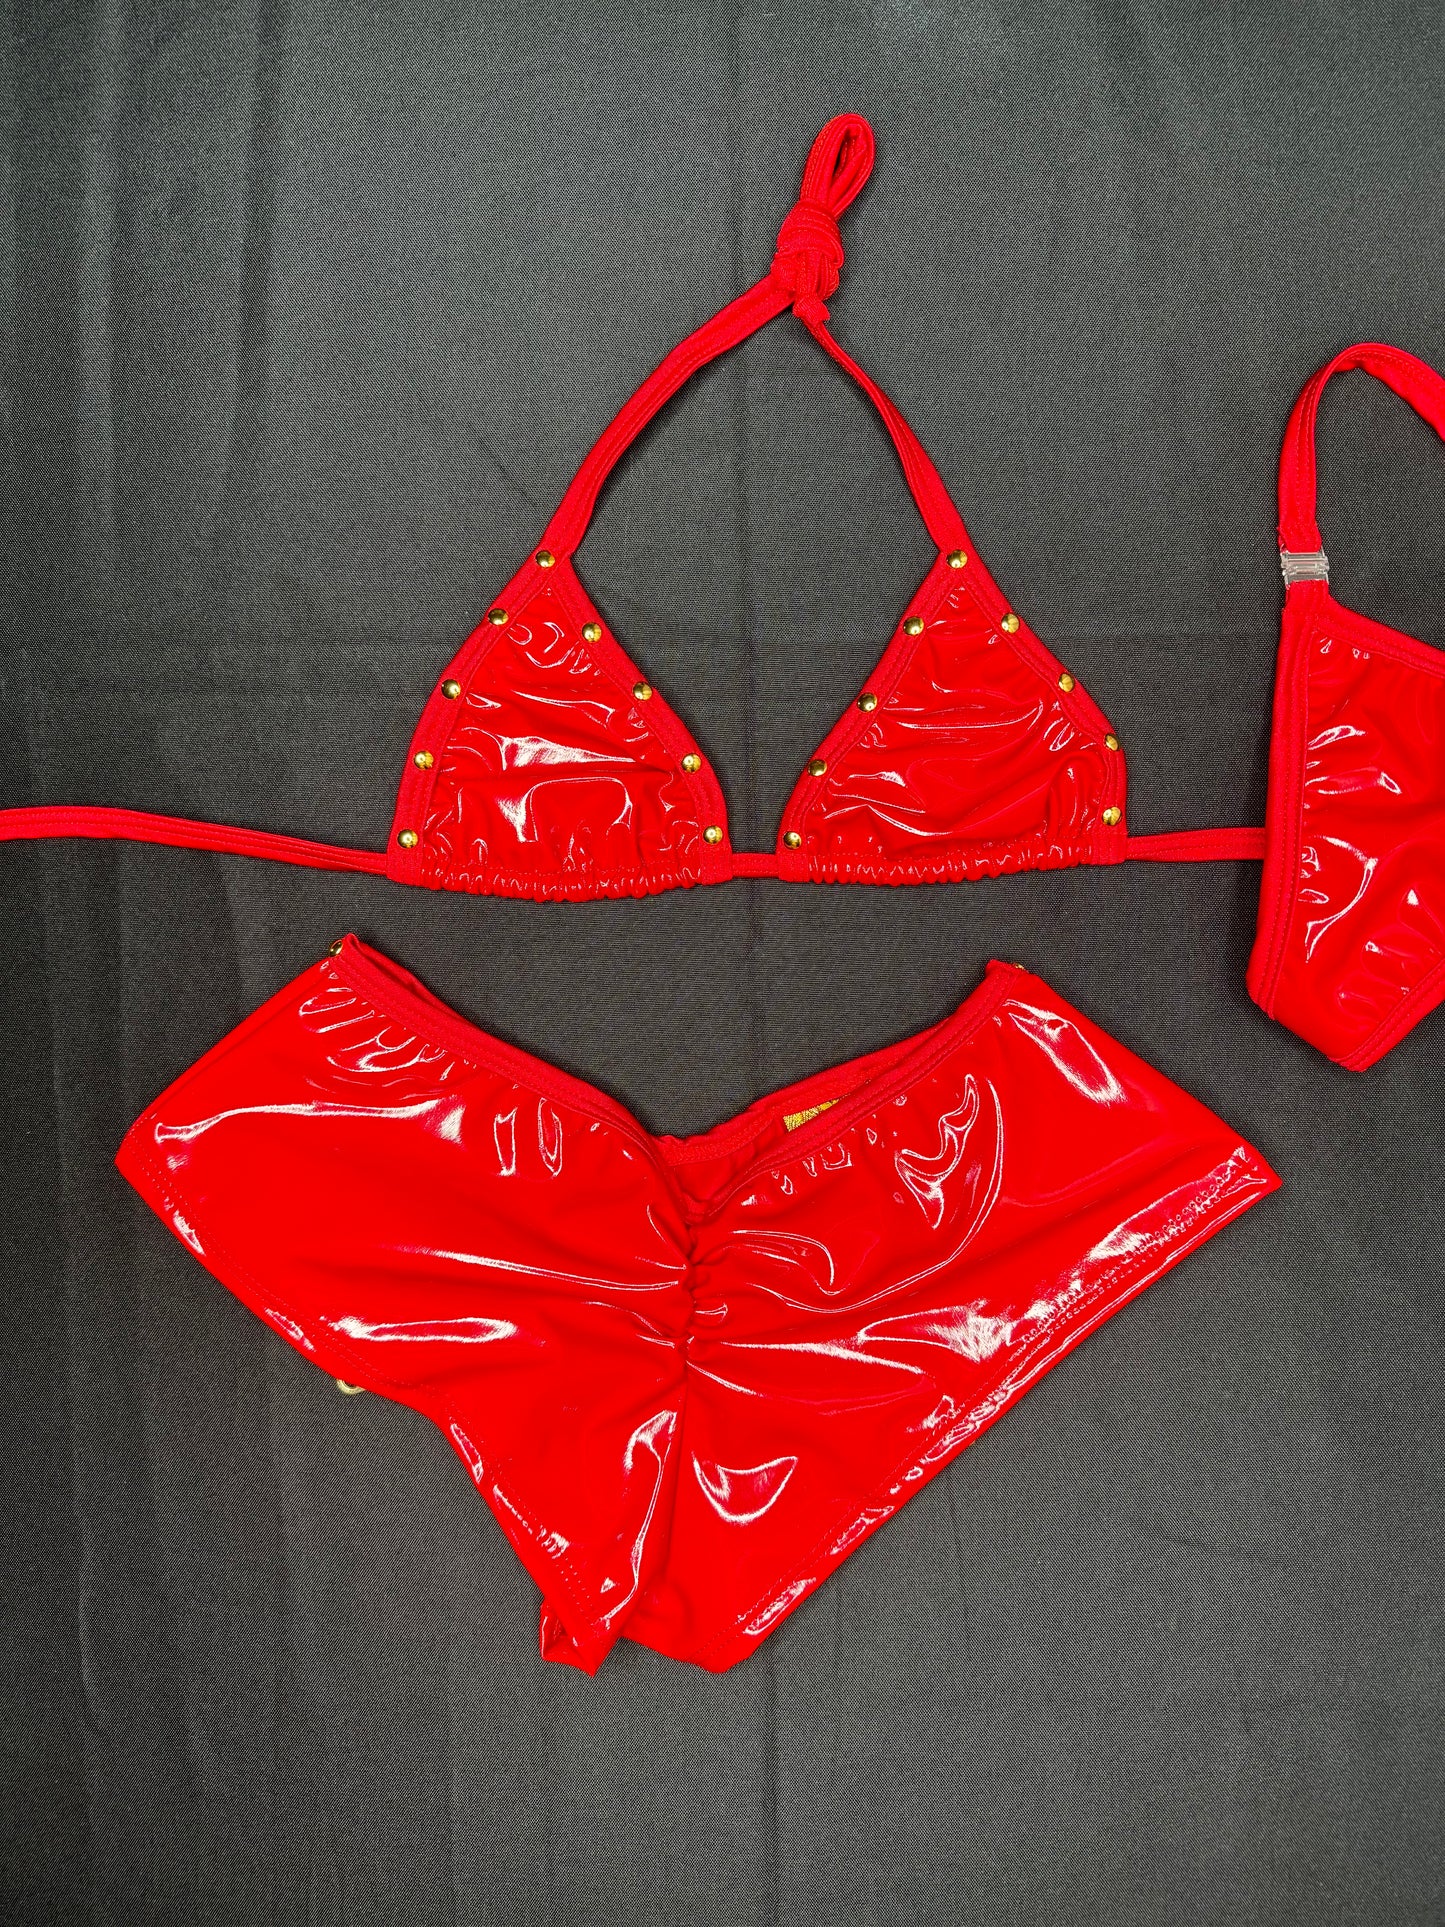 Red Latex/Gold Zipper Two-Piece Shorts Lingerie Outfit